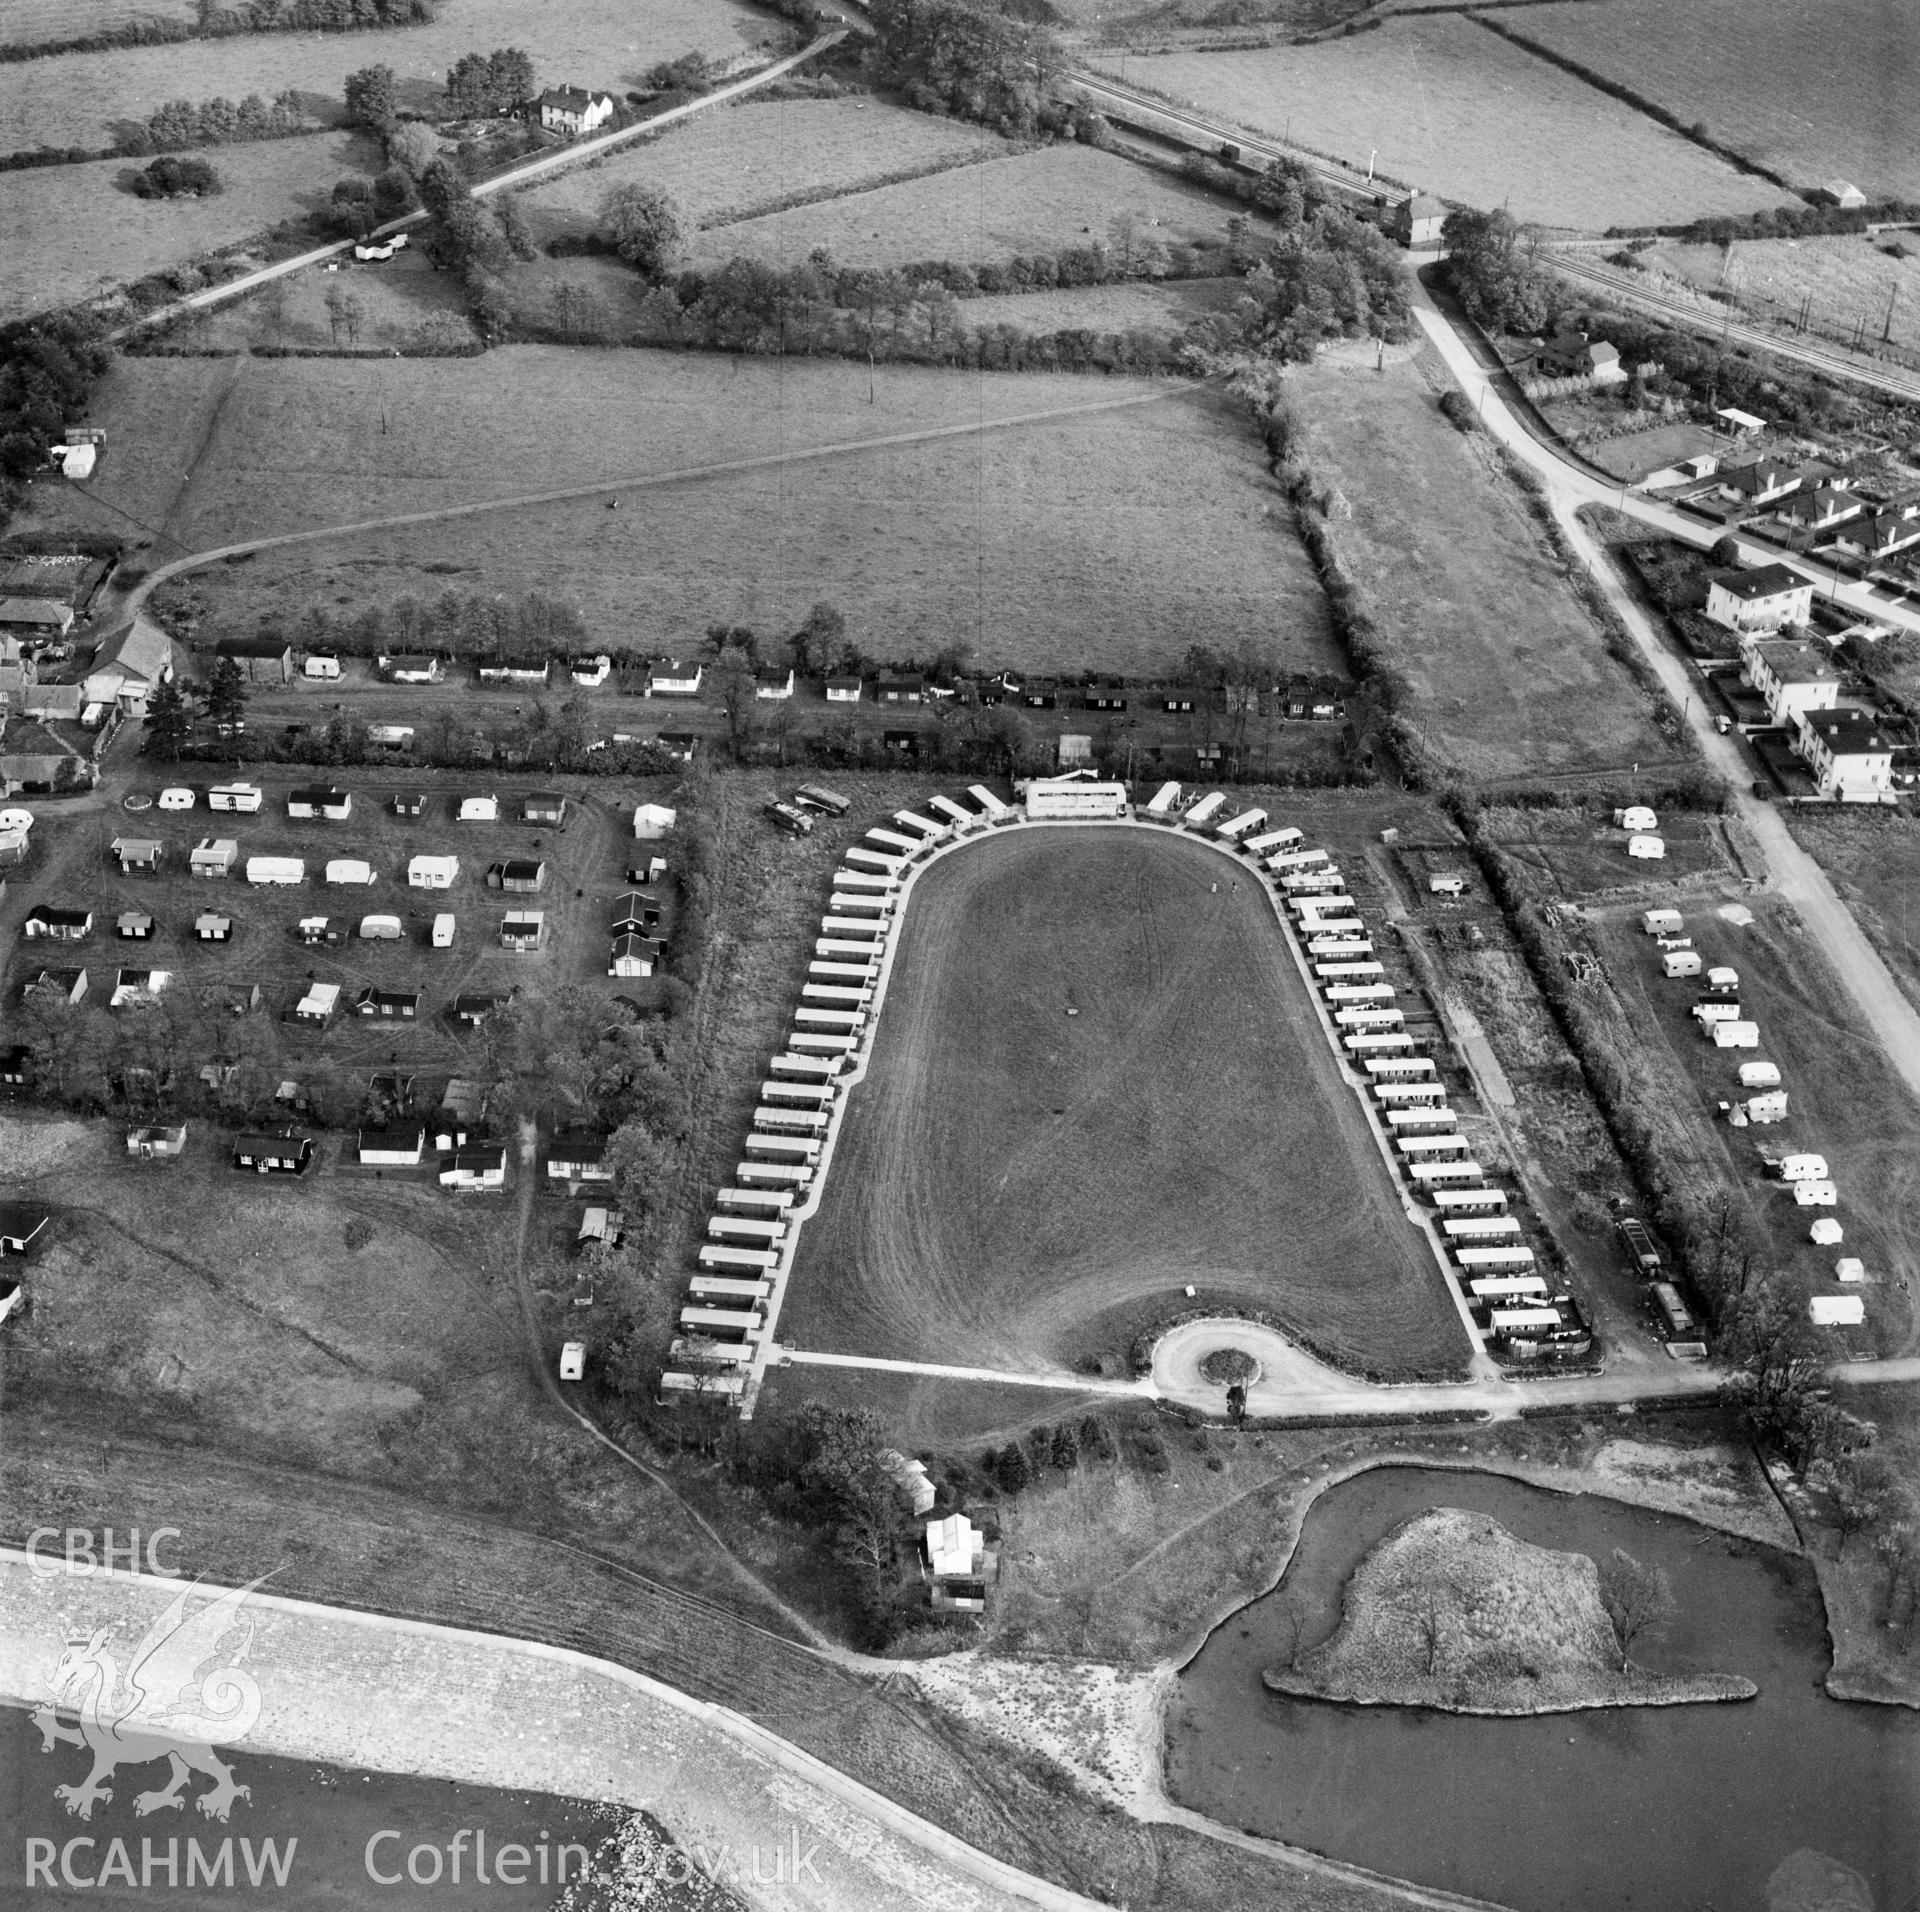 View of horseshoe shaped caravan park and prefabs located near Chepstow. Oblique aerial photograph, 5?" cut roll film.